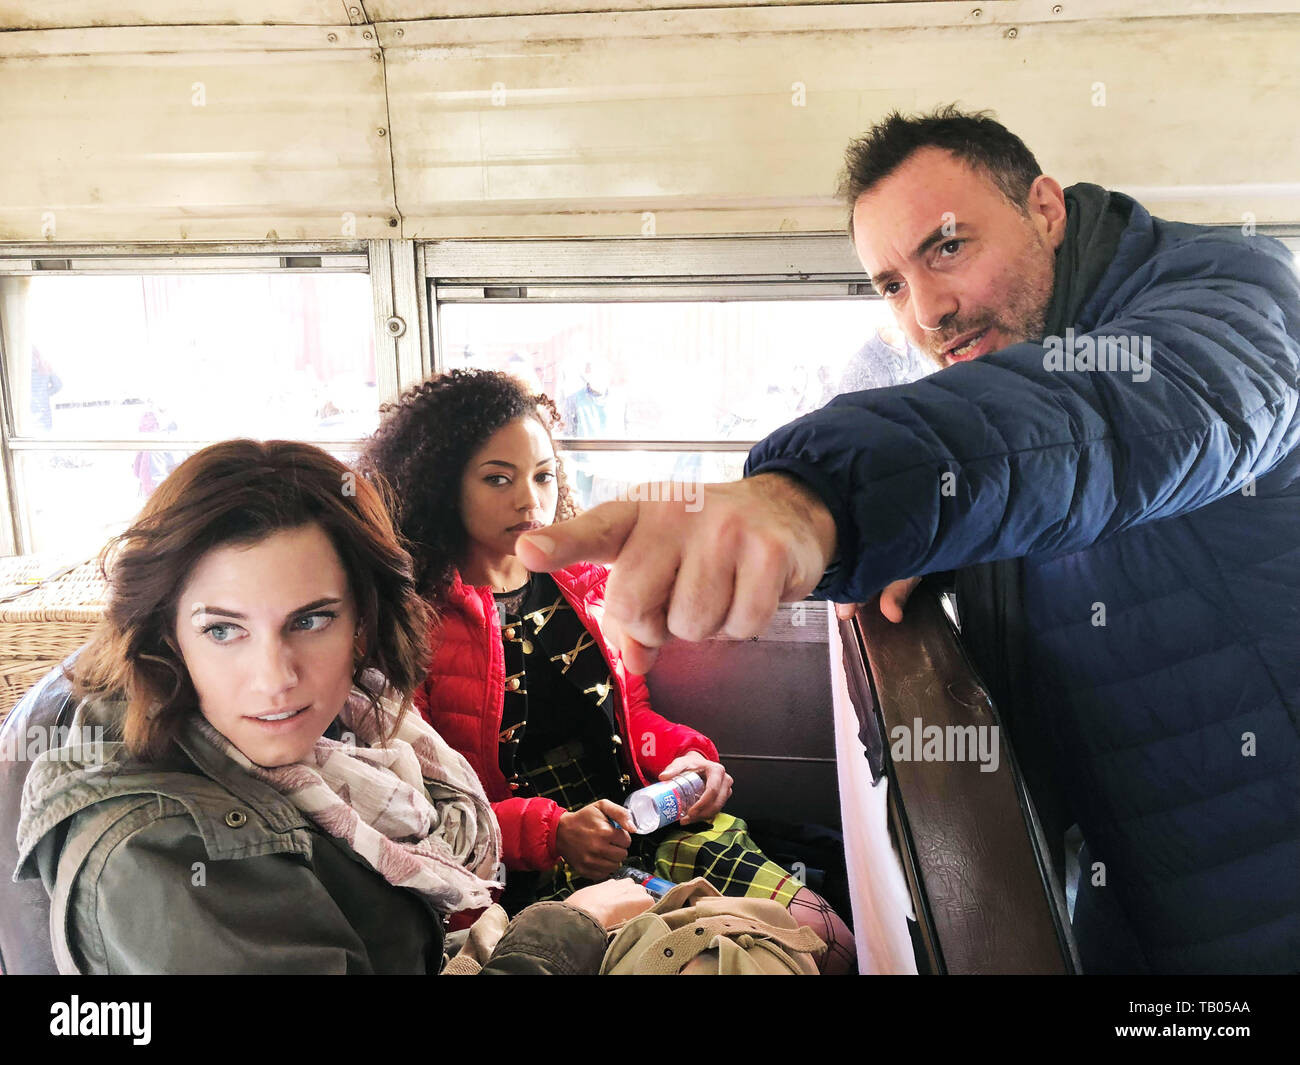 THE PERFECTION, from left: Allison Williams, Logan Browning, director Richard Shepard, on-set, 2019. © Netflix /courtesy Everett Collection Stock Photo